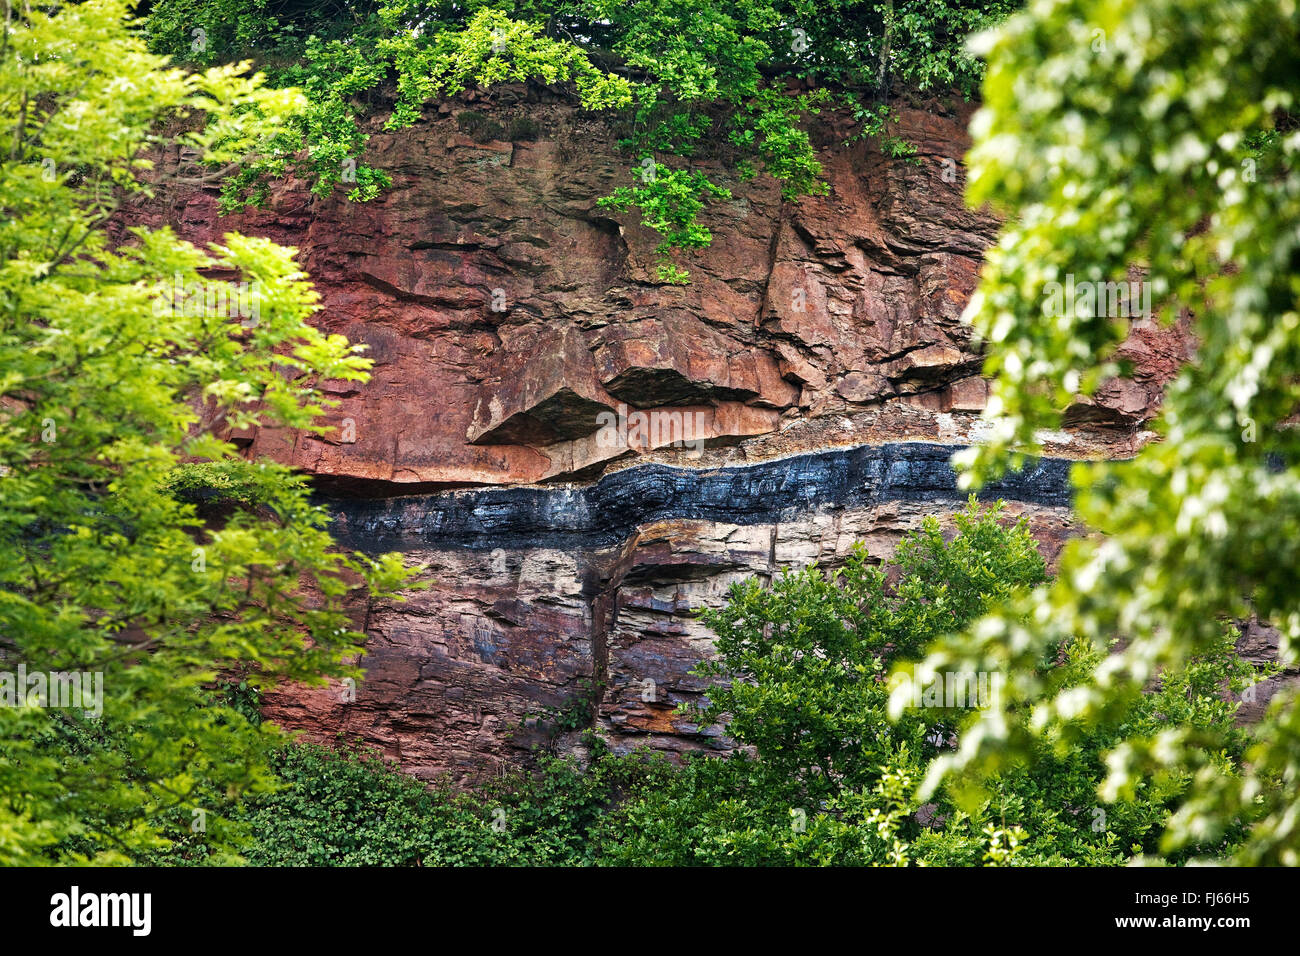 outcrop with coal seam, Germany, North Rhine-Westphalia, Ruhr Area, Witten Stock Photo